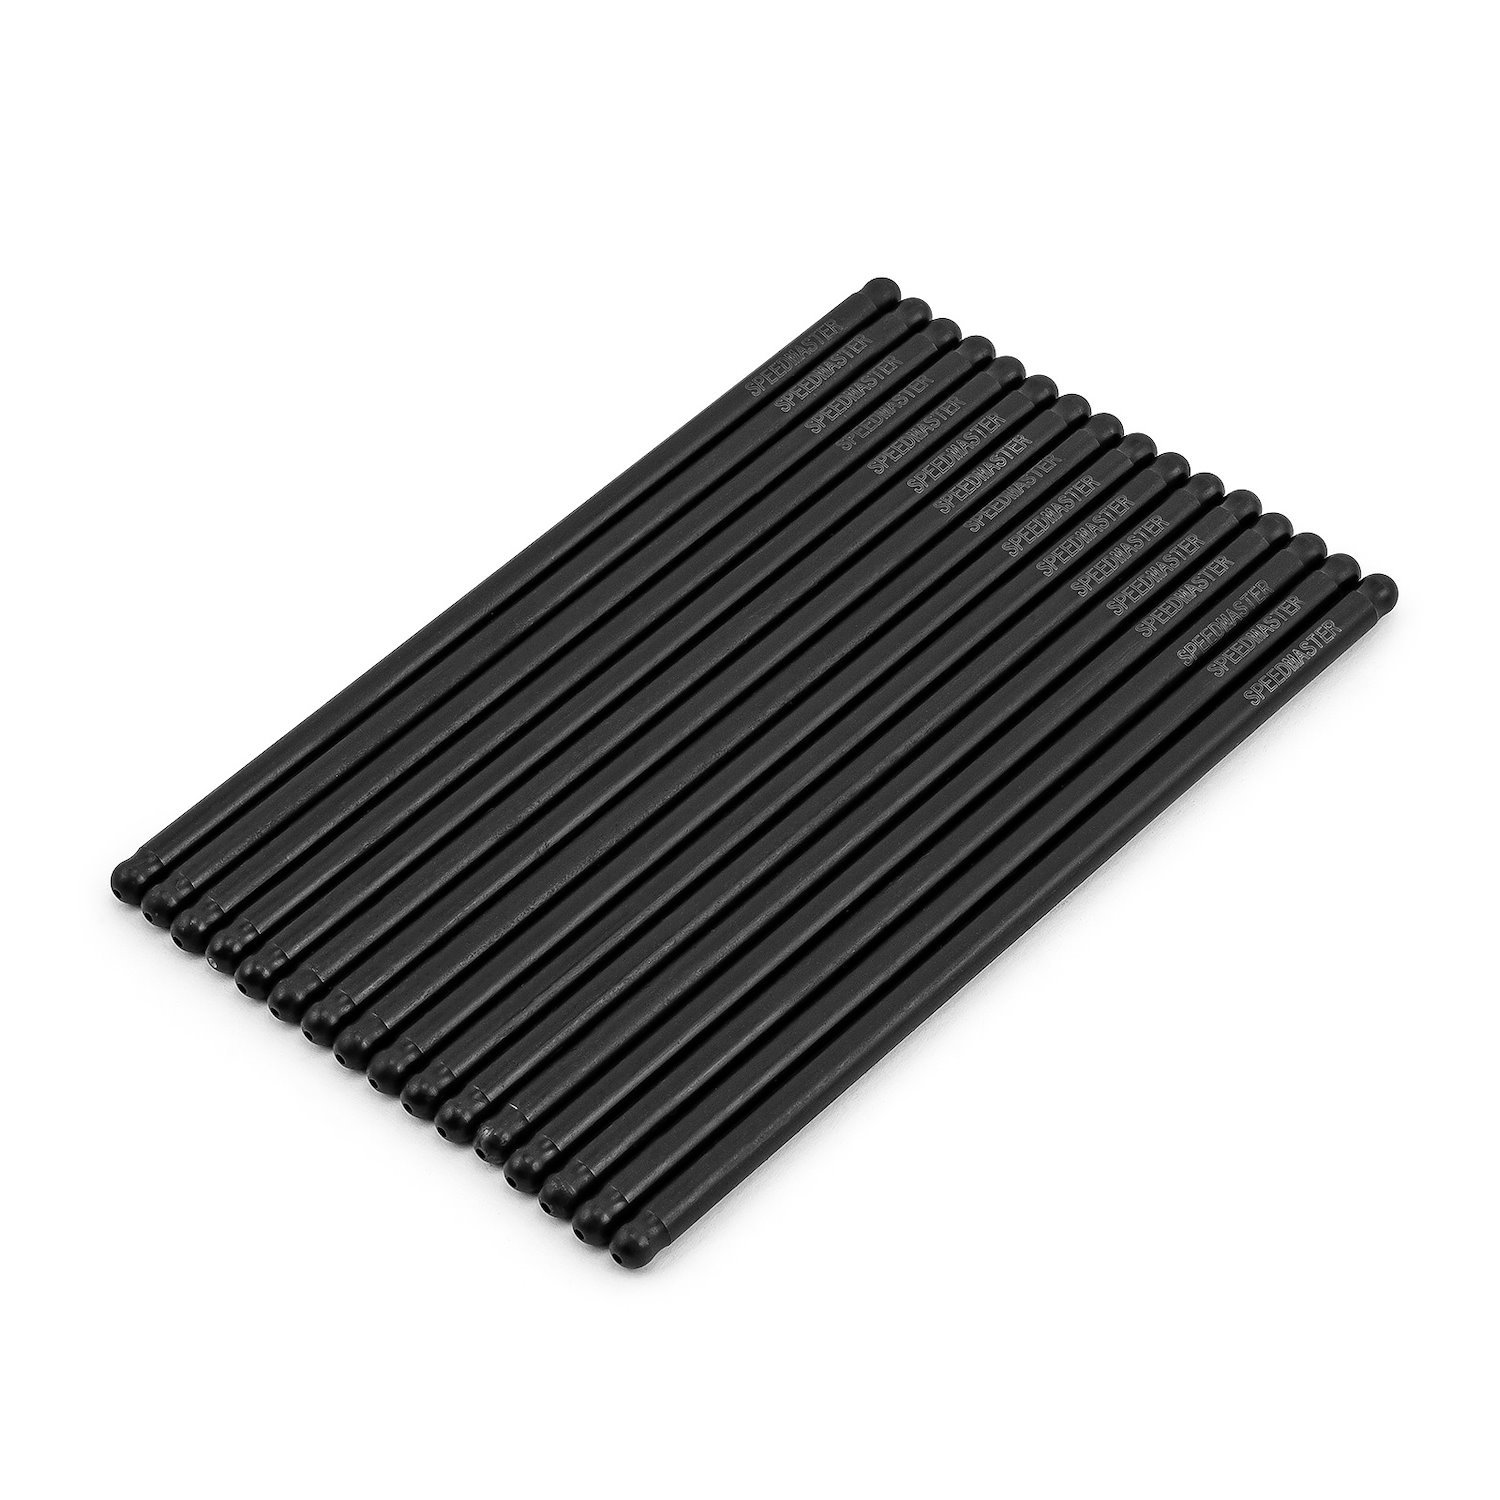 1-254-024 8.900 in. Chromoly Heat-Treated 5/16 in. 0.080 in. Wall DNA One-Piece Pushrods